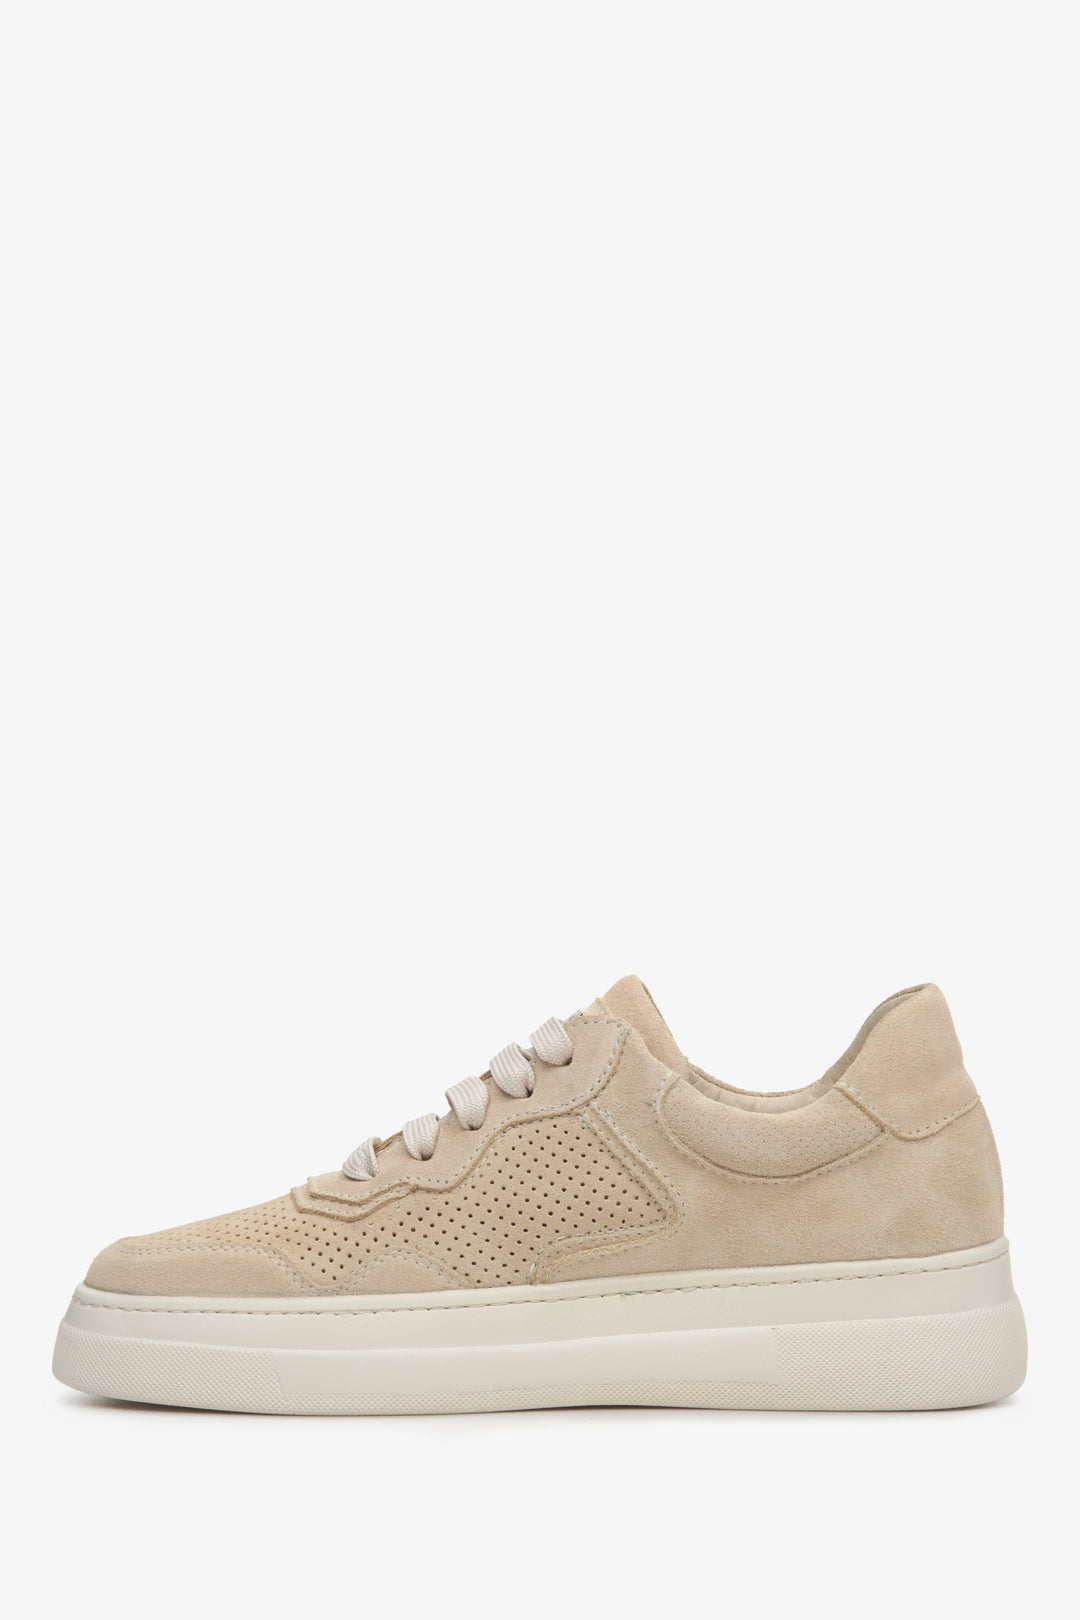 Light beige women's sneakers made of natural suede Estro - shoe profile.